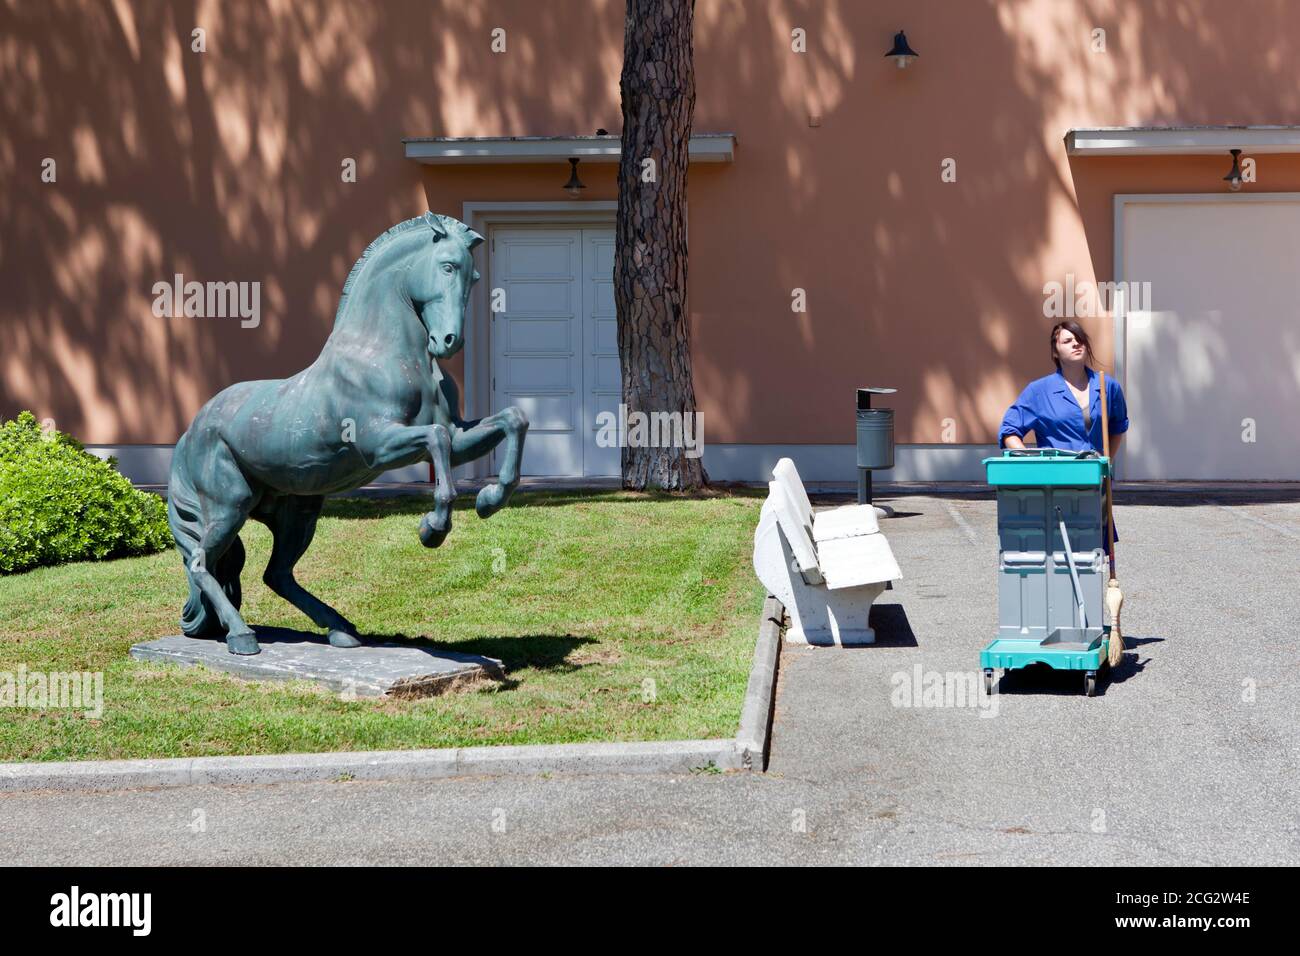 ROME - Cleaner and statue of a horse at the Cinecitta studios Stock Photo